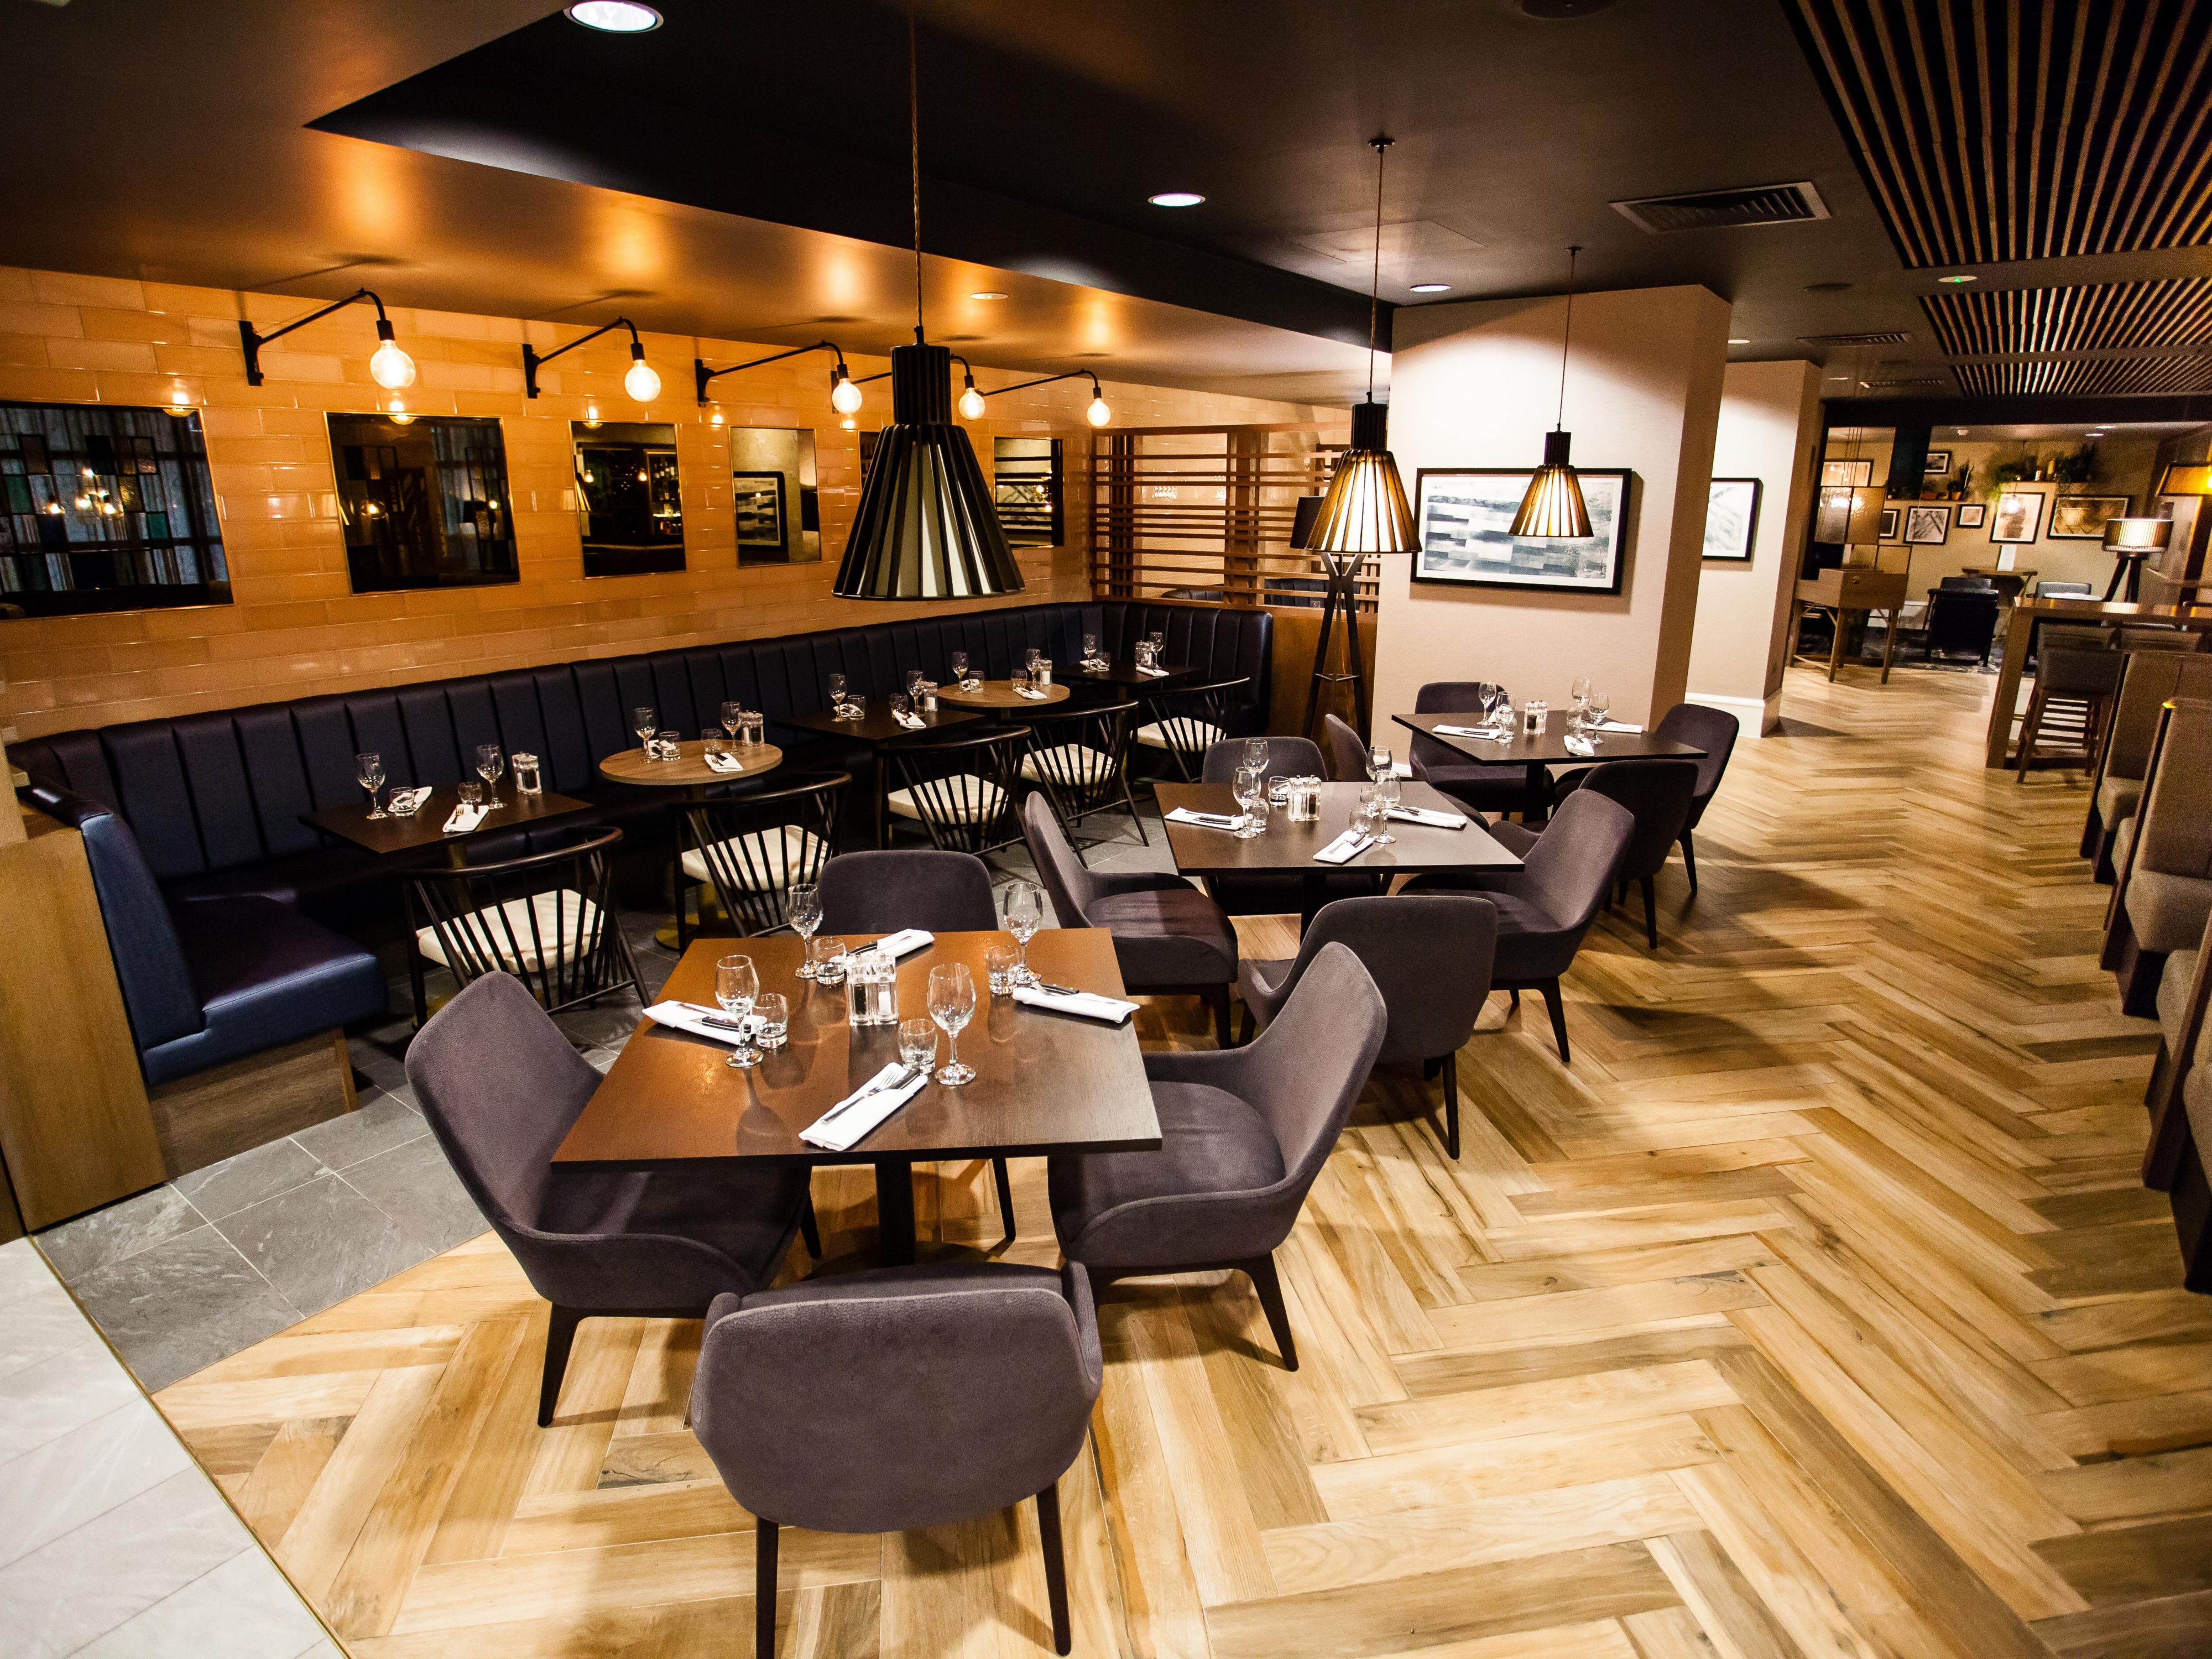 Indulgent dining and satisfying cocktails. Need we say more? 

If you’re looking for somewhere that offers a selection of Yorkshire’s finest food and drinks with a stylish design and fabulous atmosphere, Bar and Kitchen @LS1 is perfect for you.
